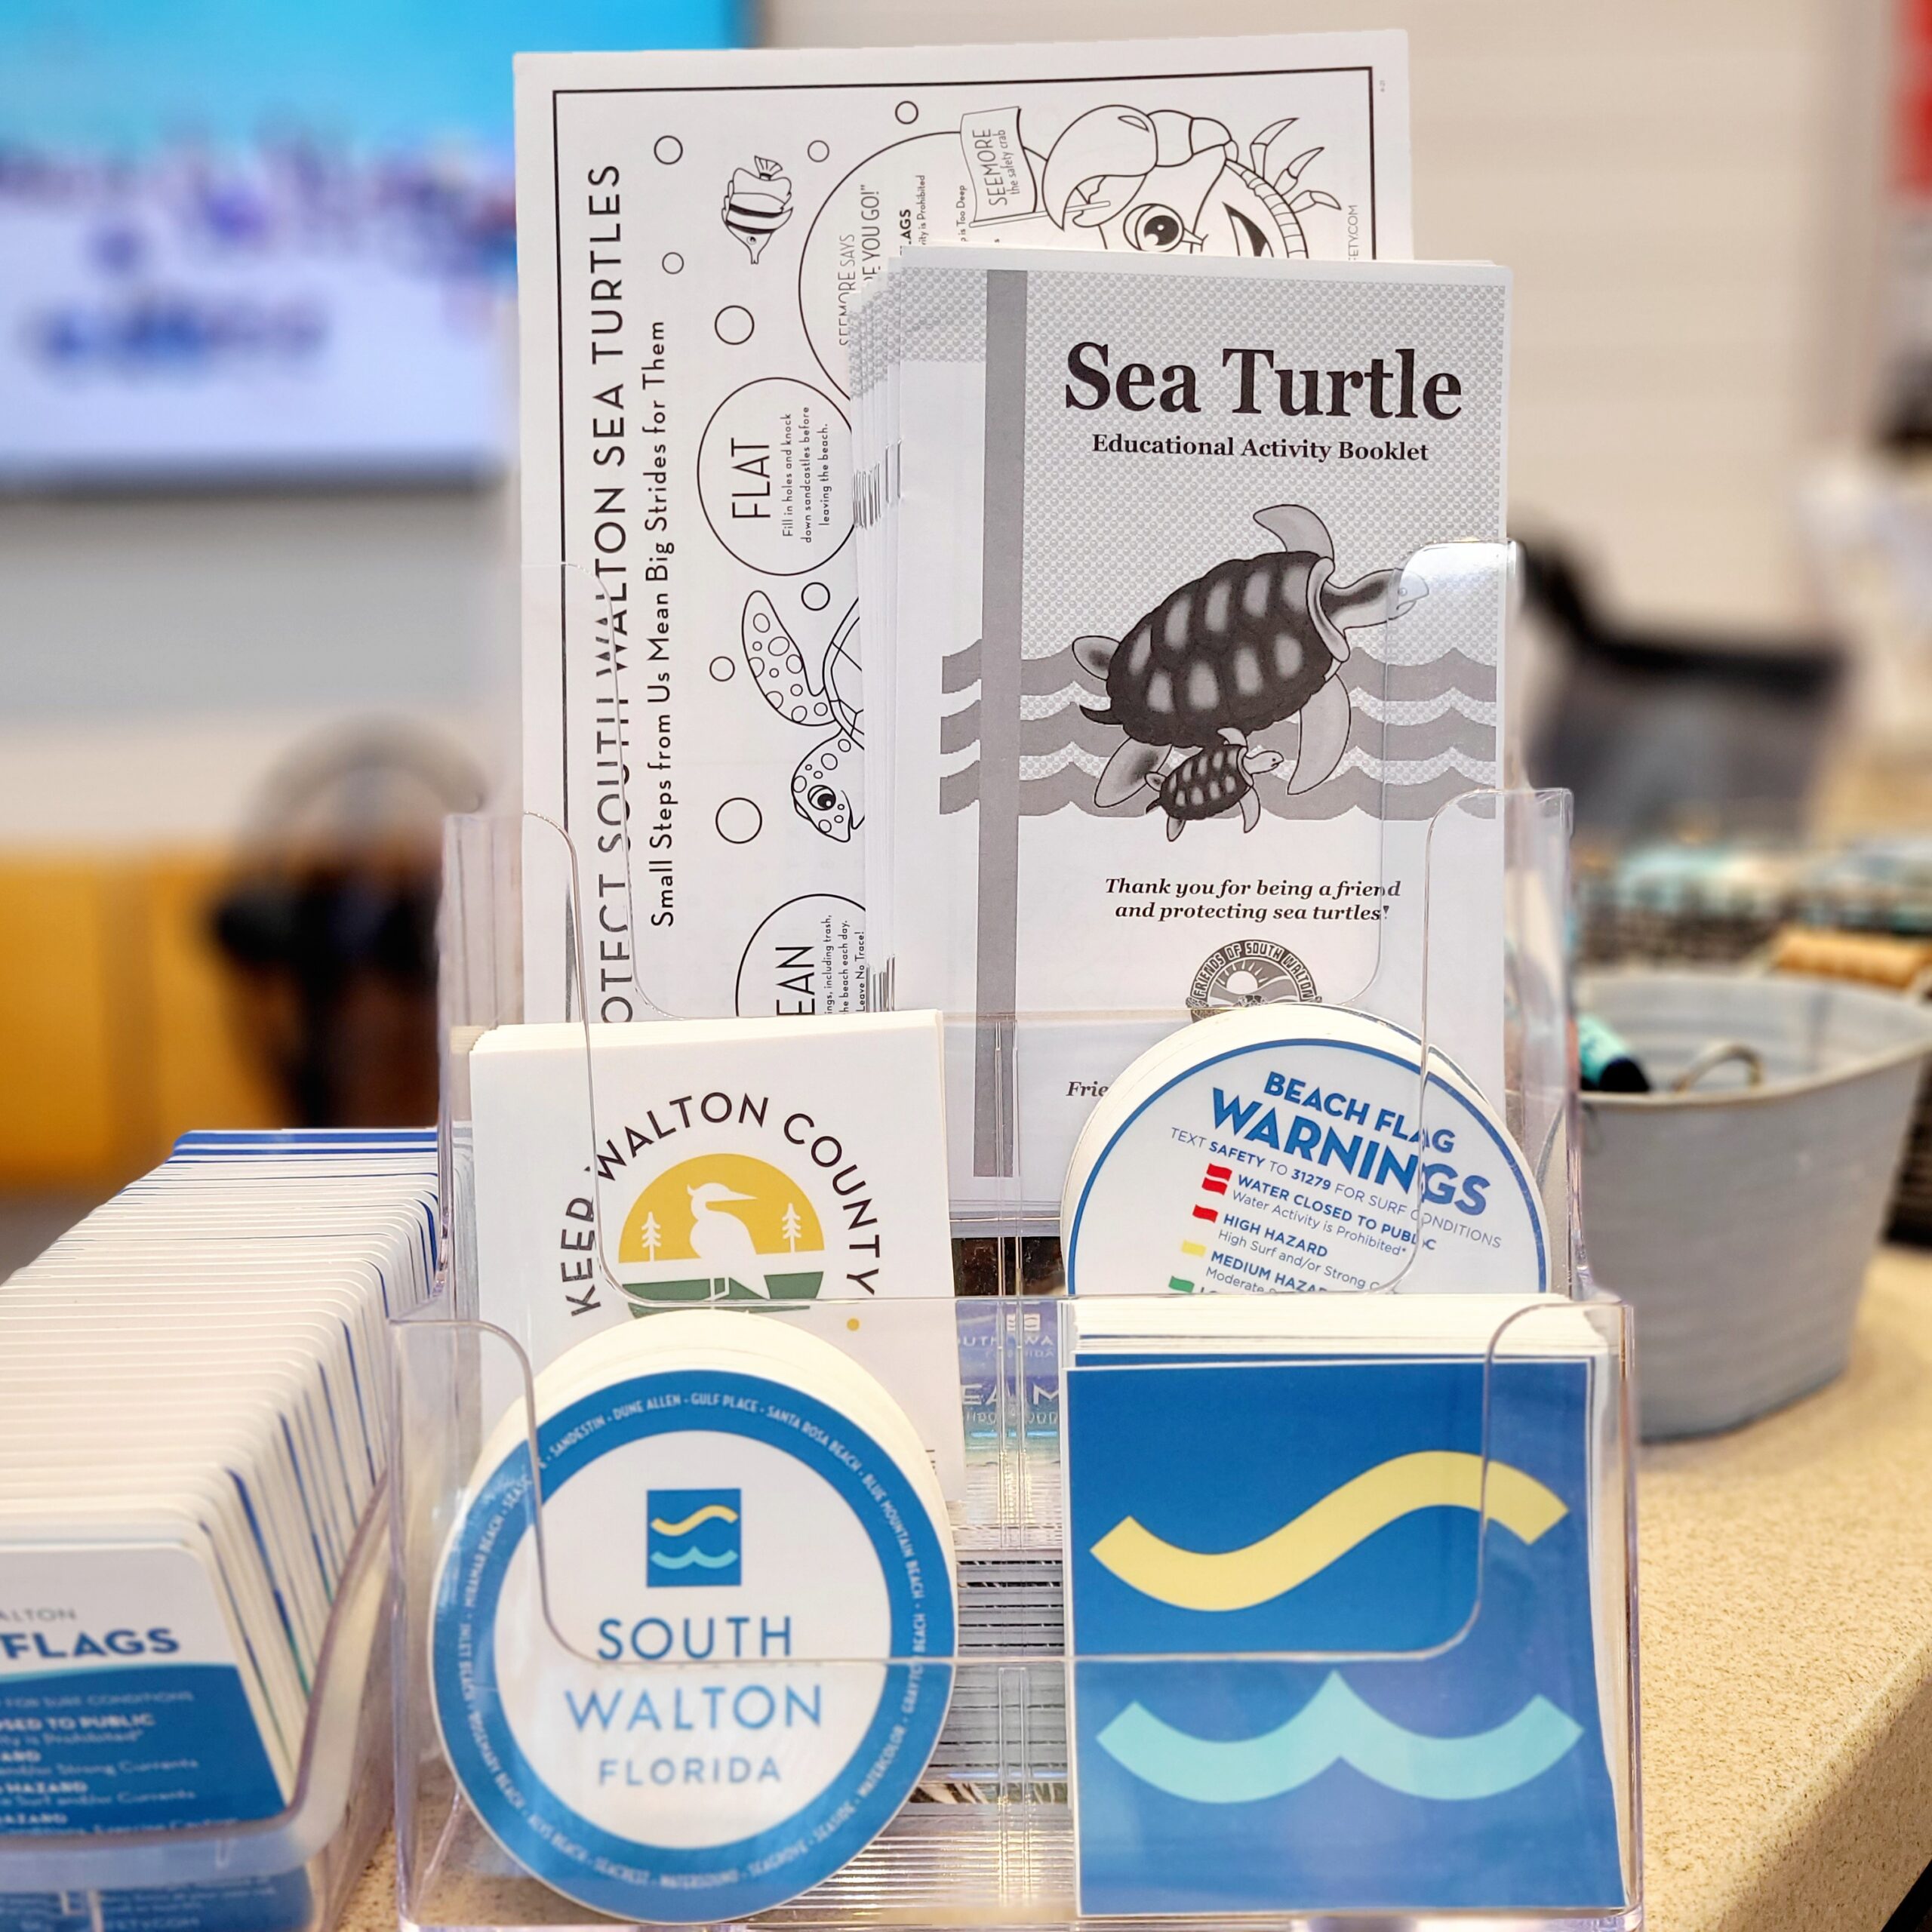 Friends of South Walton Sea Turtles promotional materials distributed in Walton County.